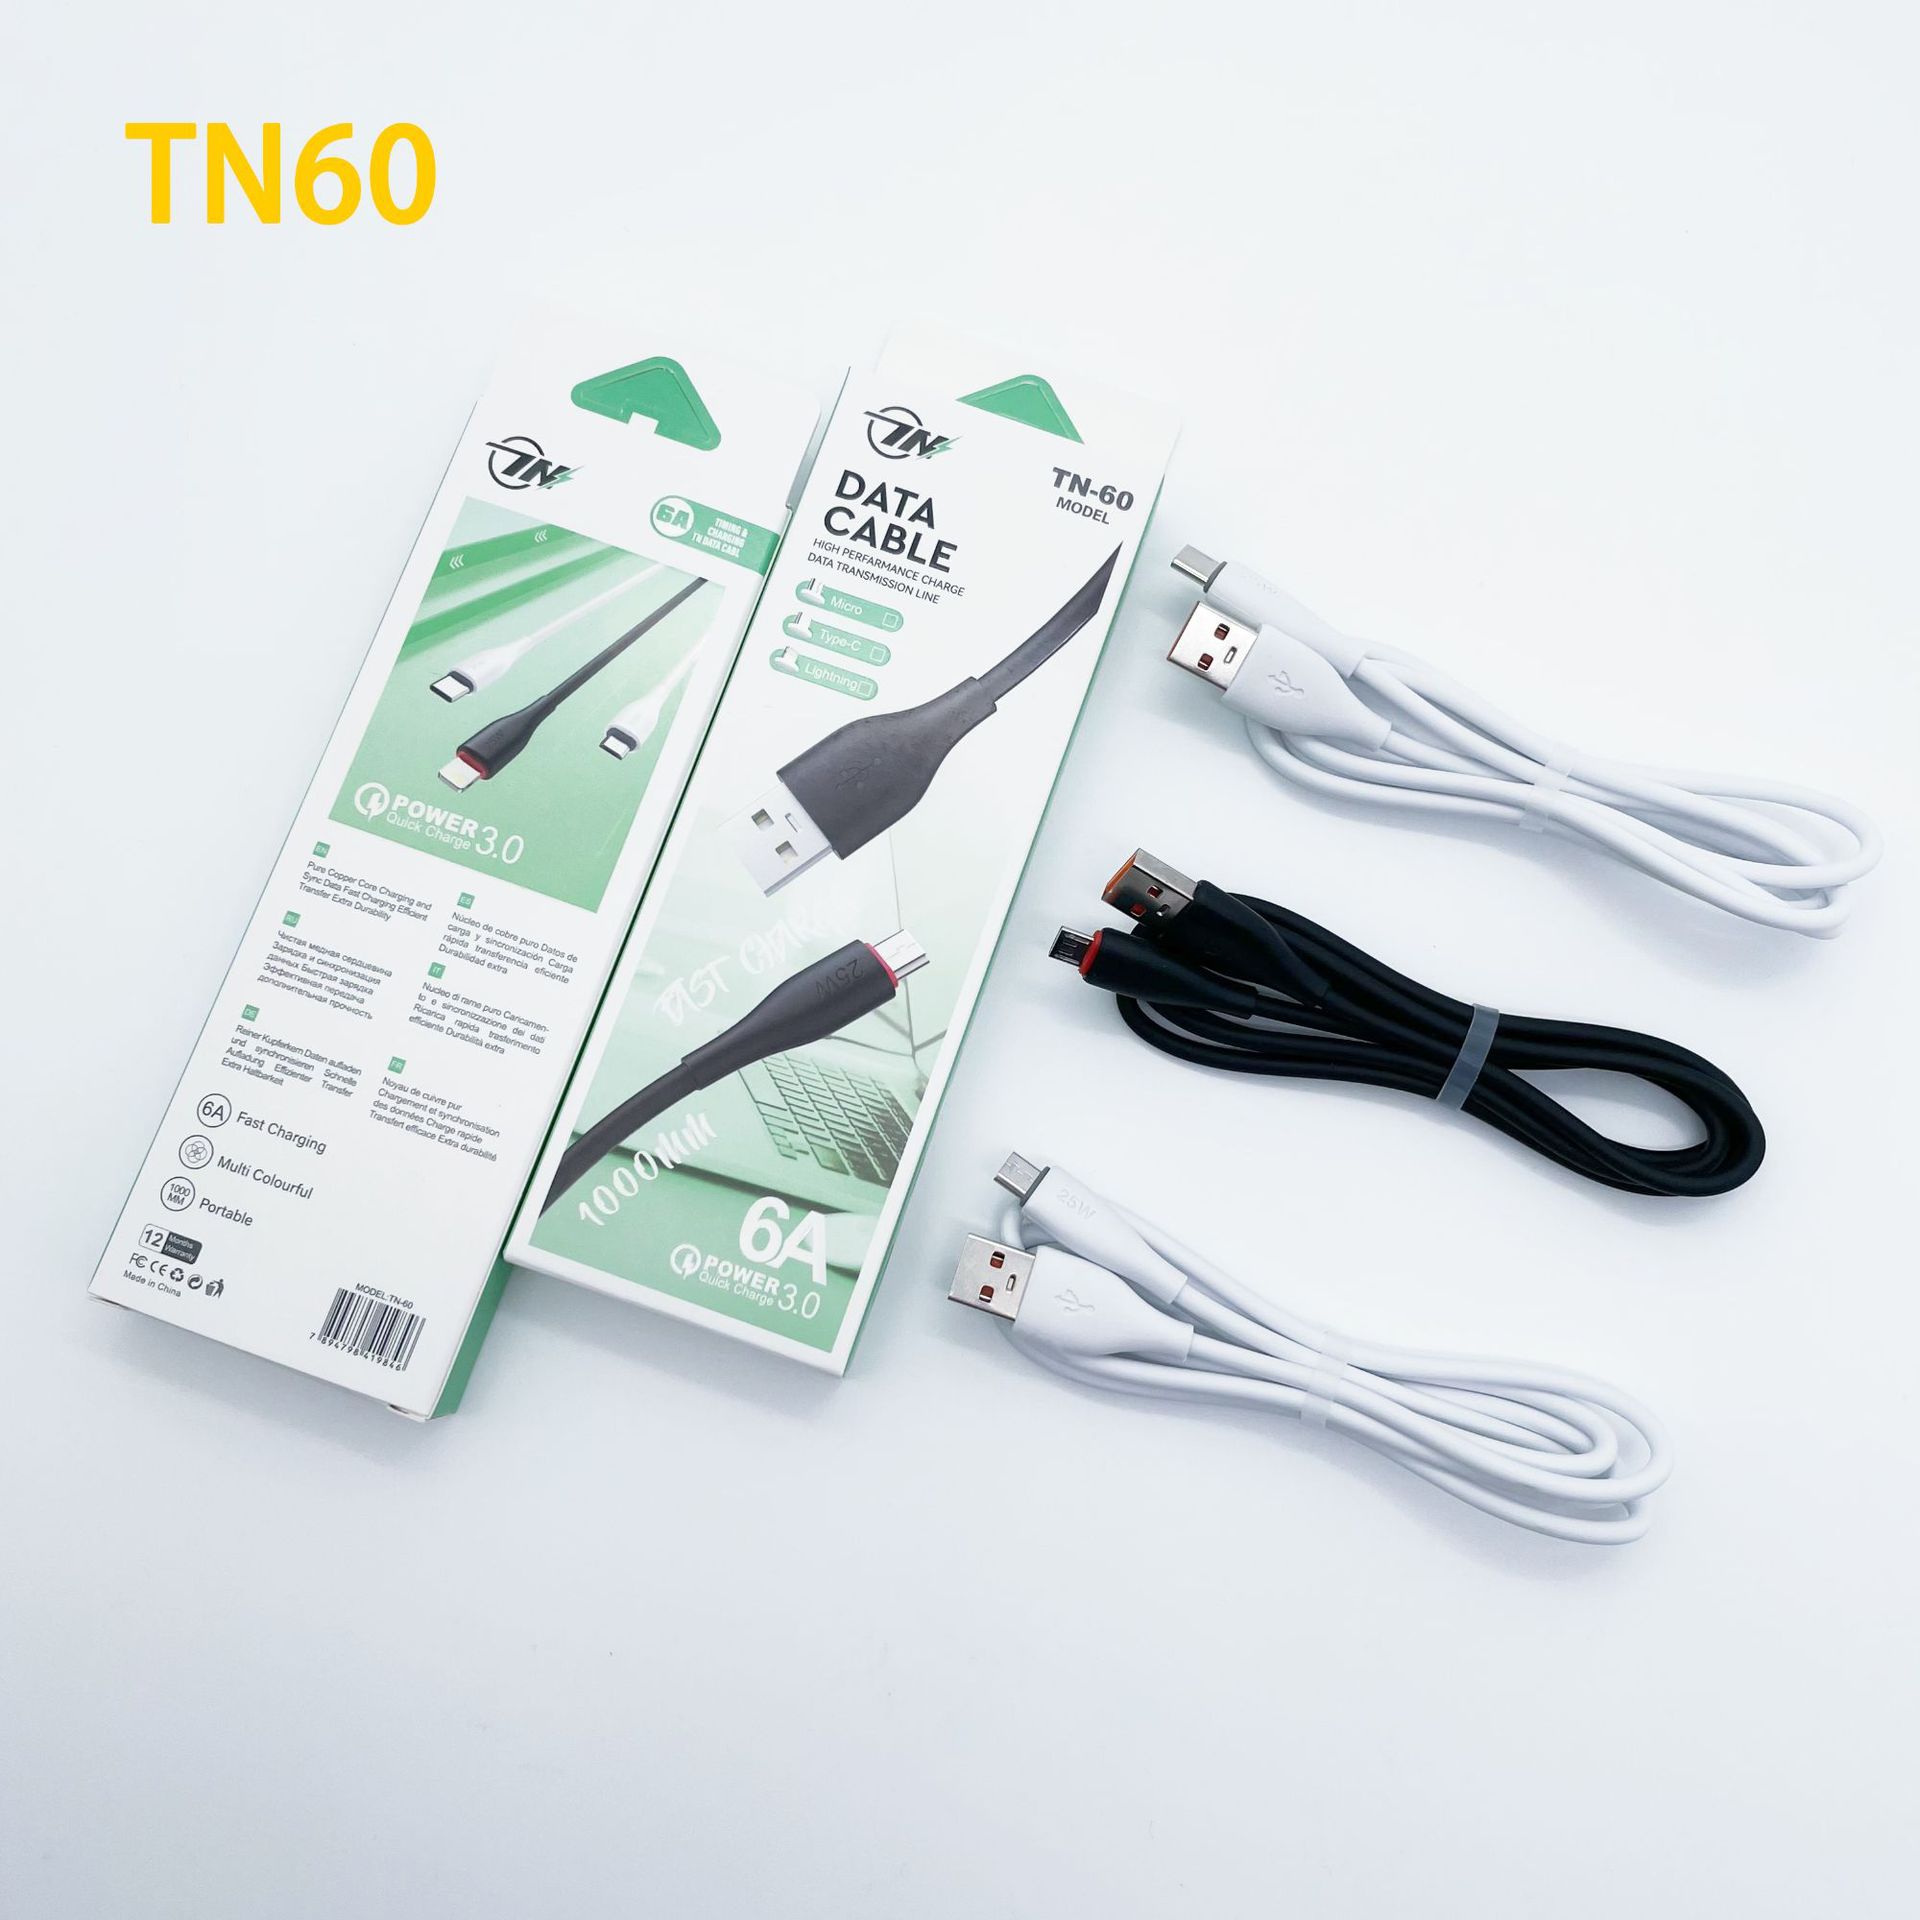 Tn60 New PVC Fast Charge Data Cable Support I5 Android TC Smartphone Qc3.0 Function Delivery Supported